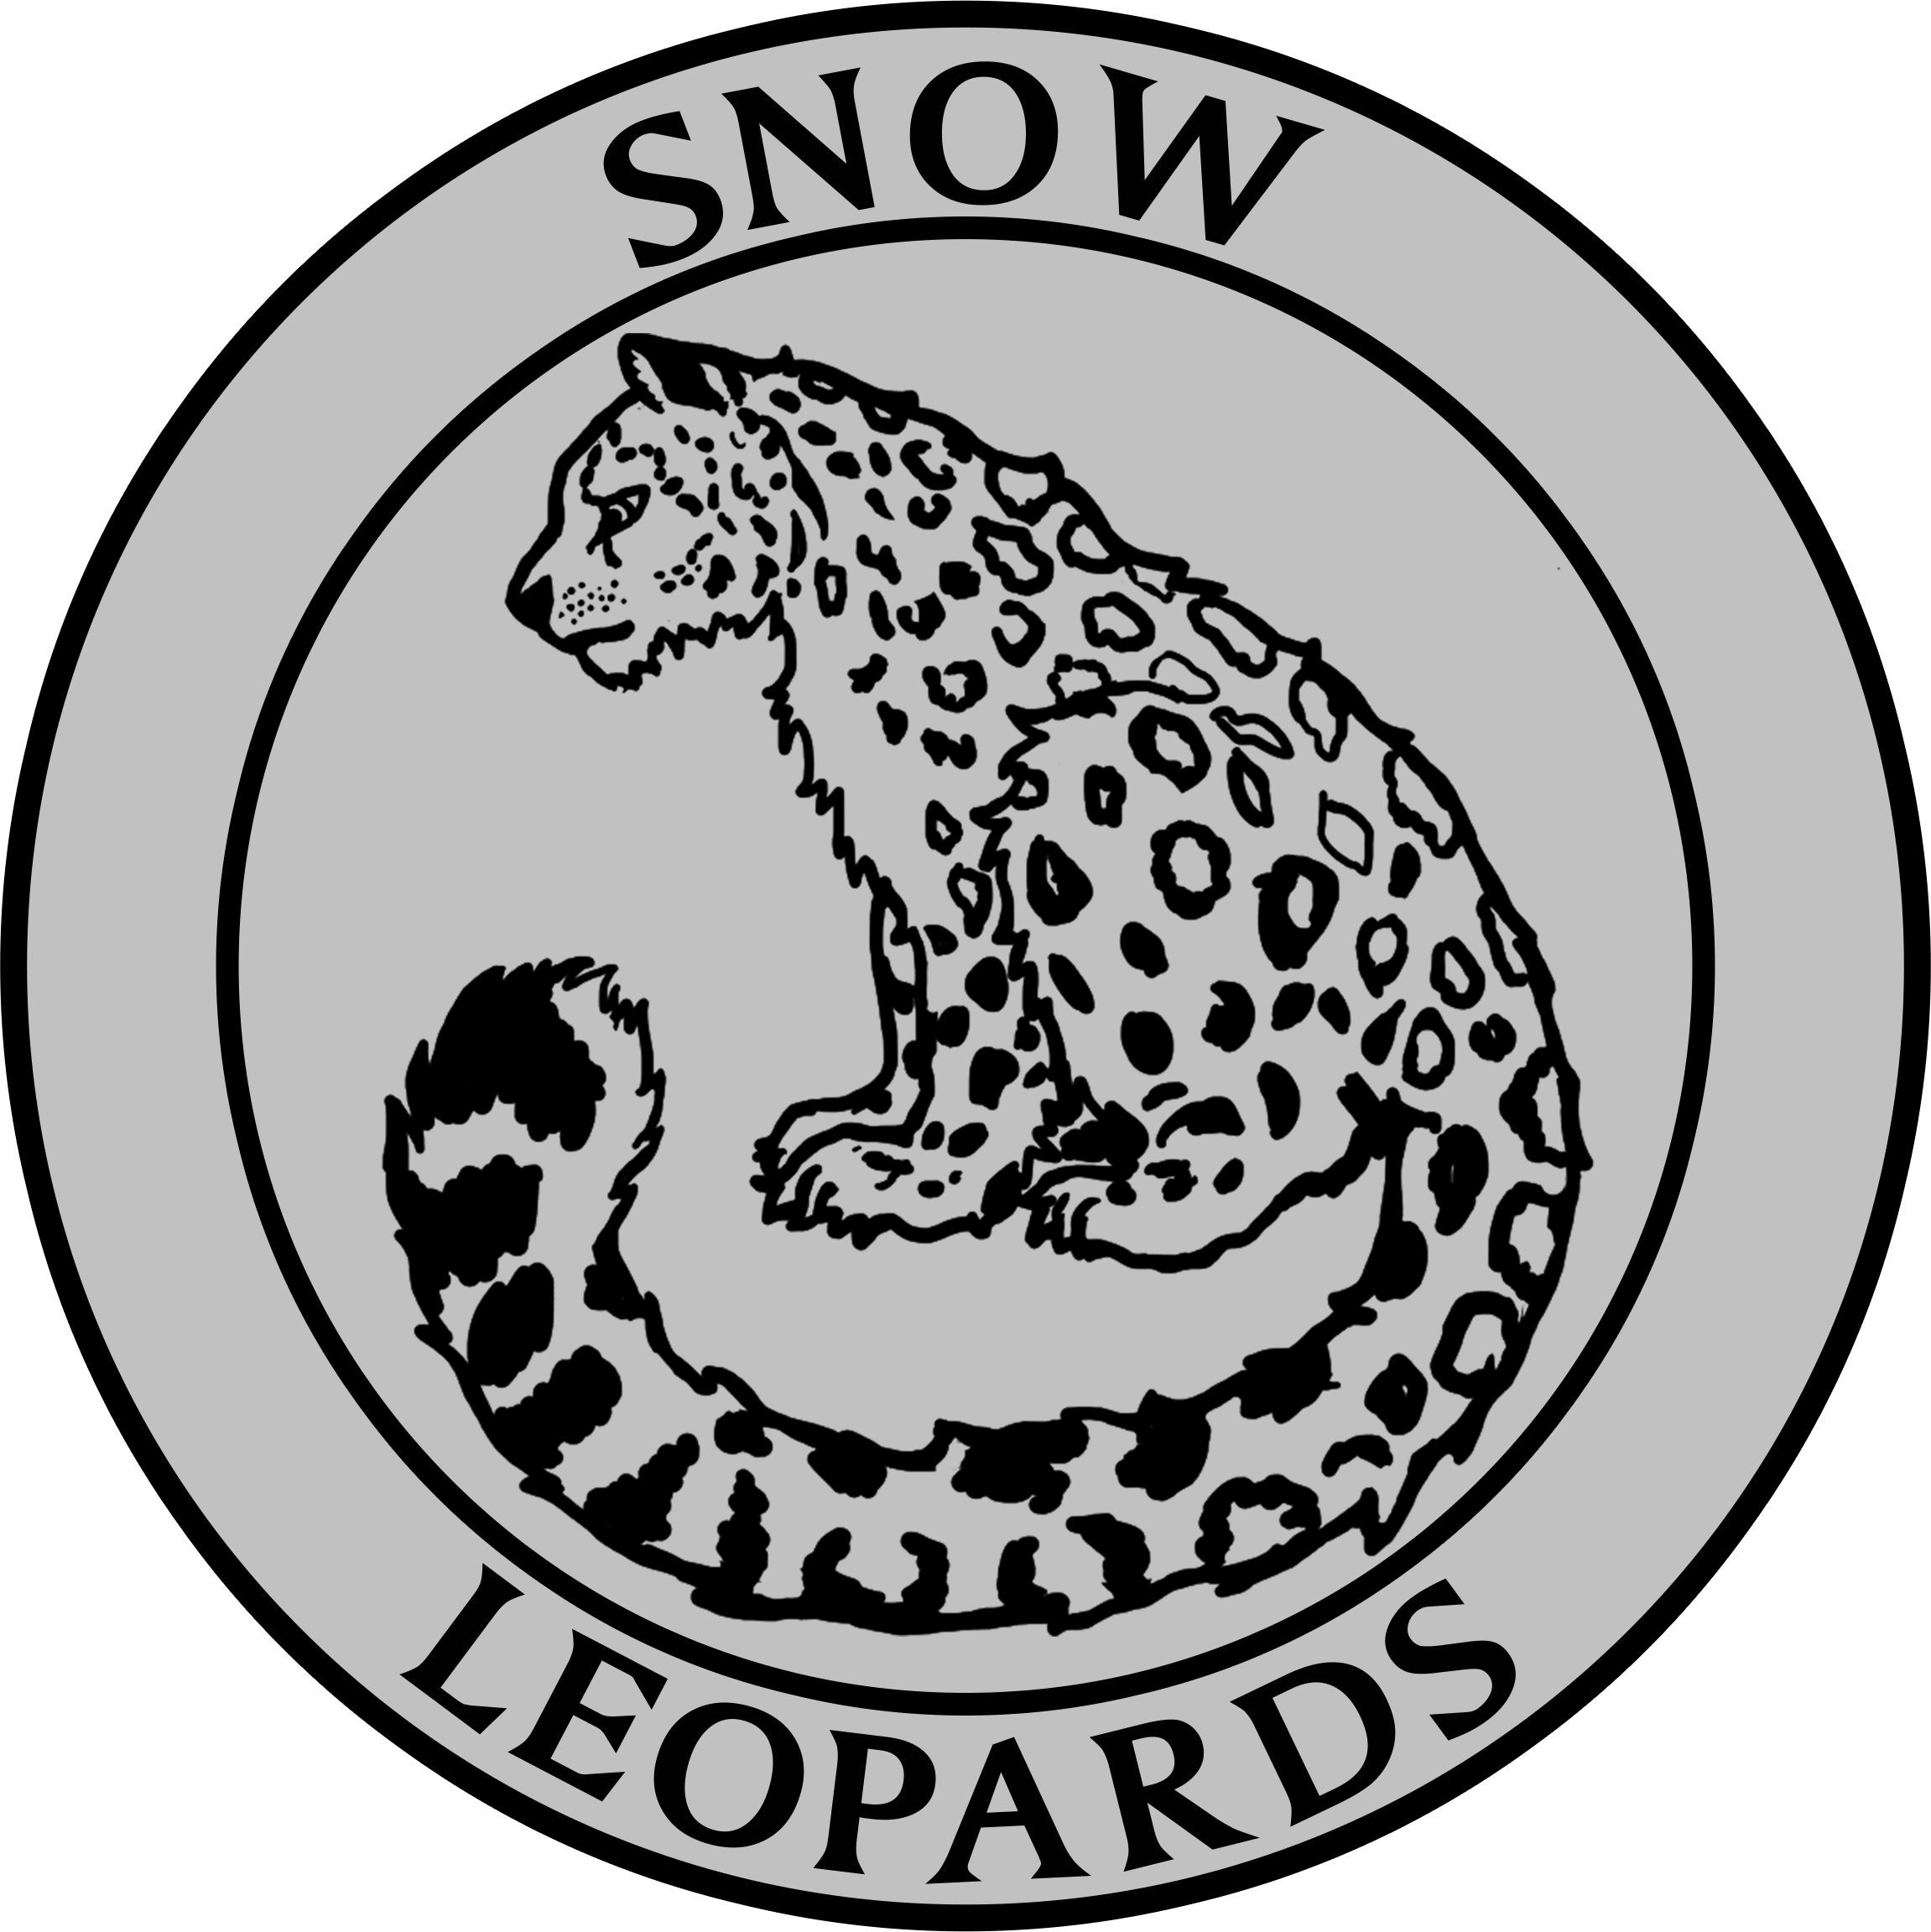 Snow Leopards: Basic Weapons Striking